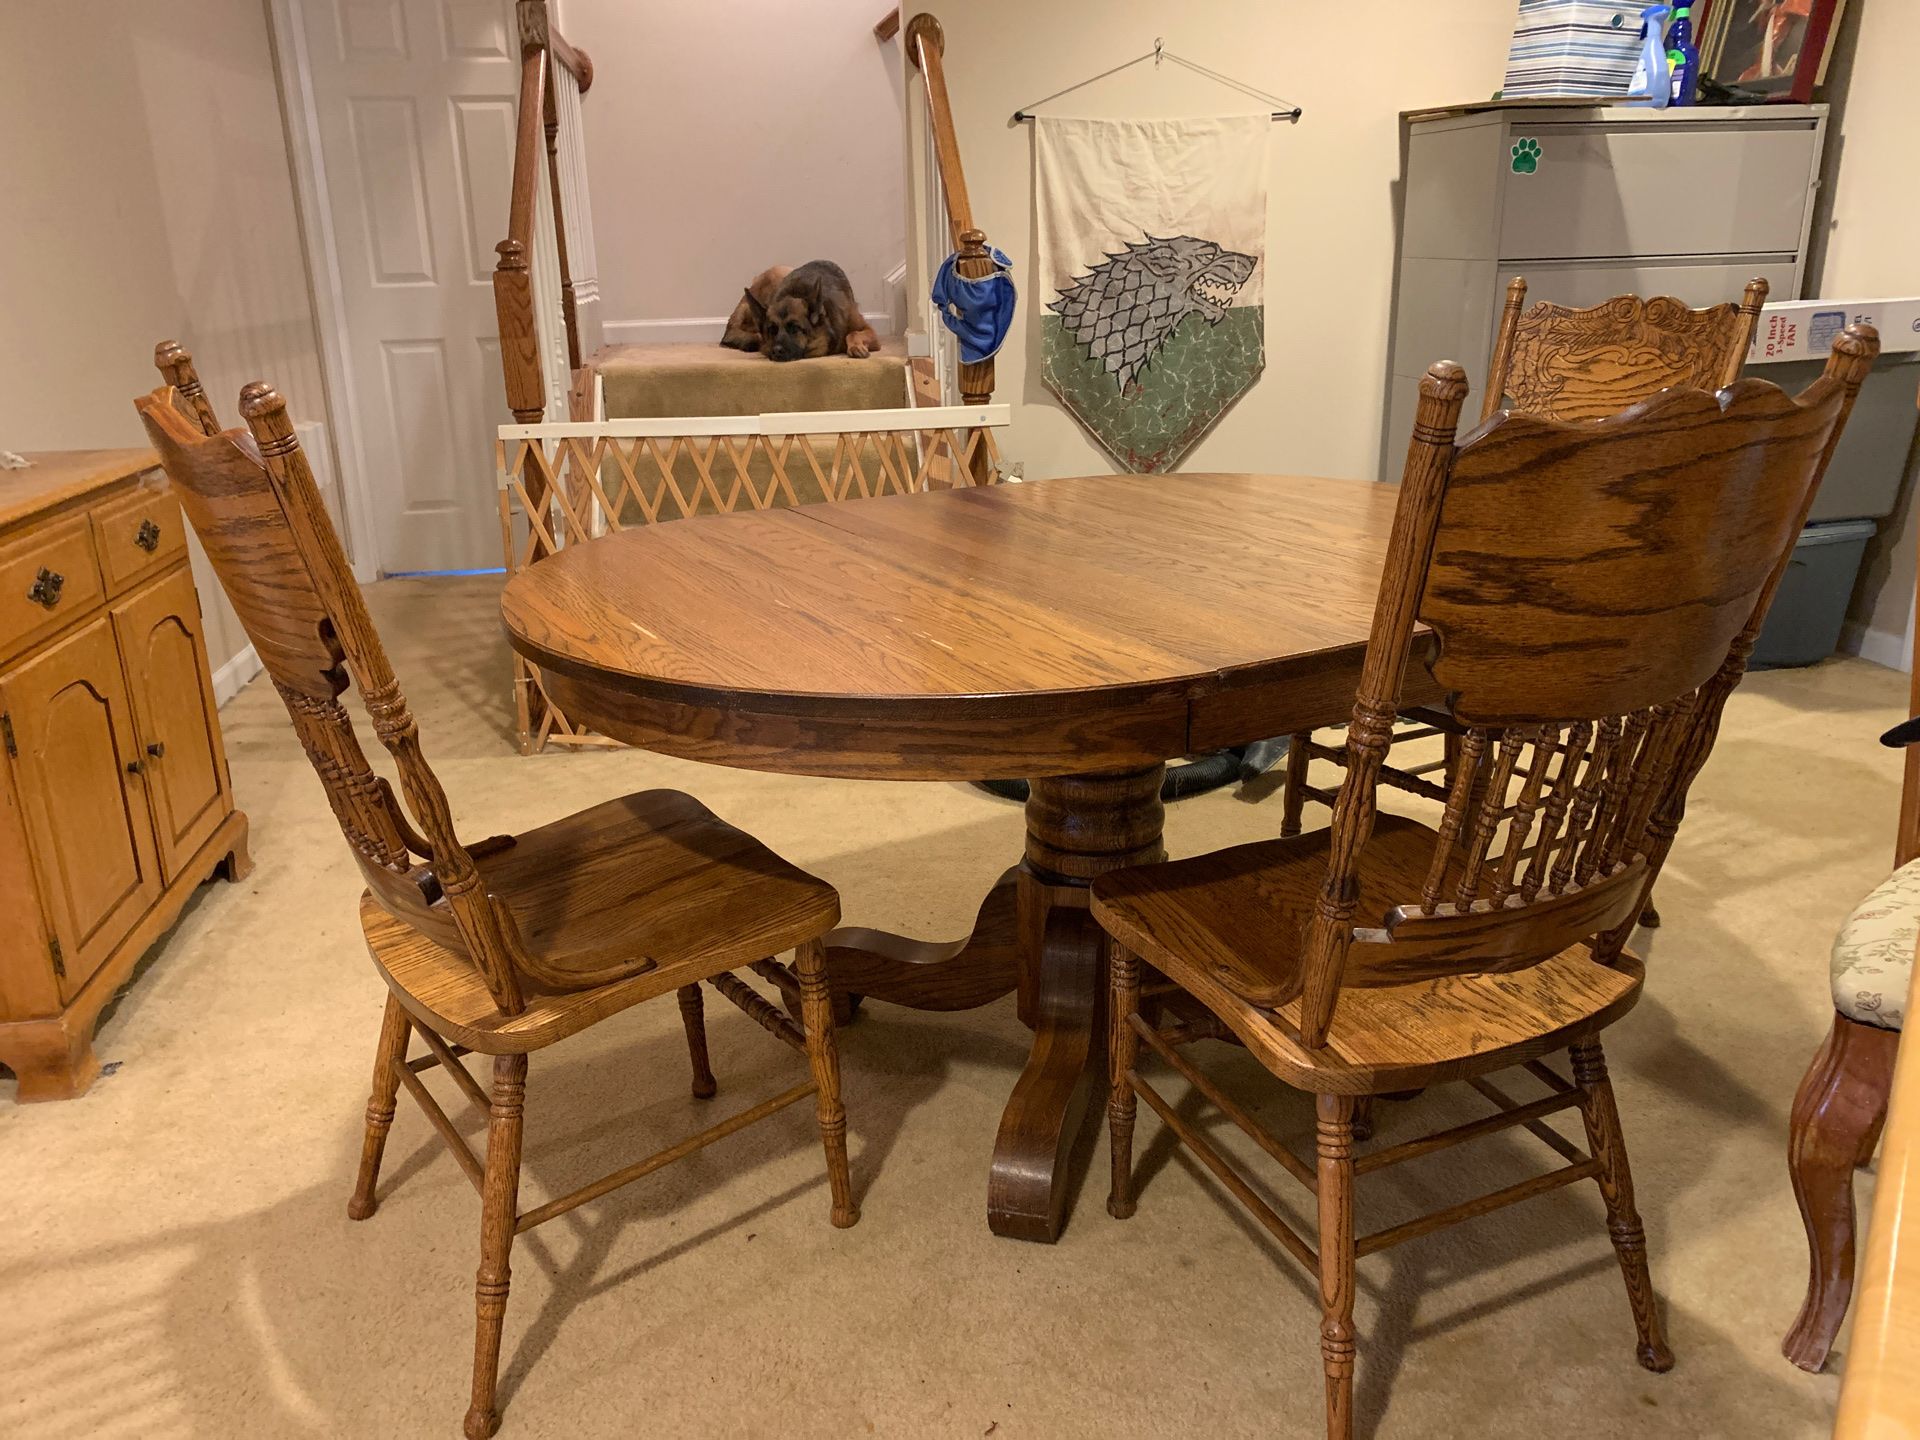 Antique Amish solid oak table with 3 chairs. 850. for all. Normally sold for 1480.00.